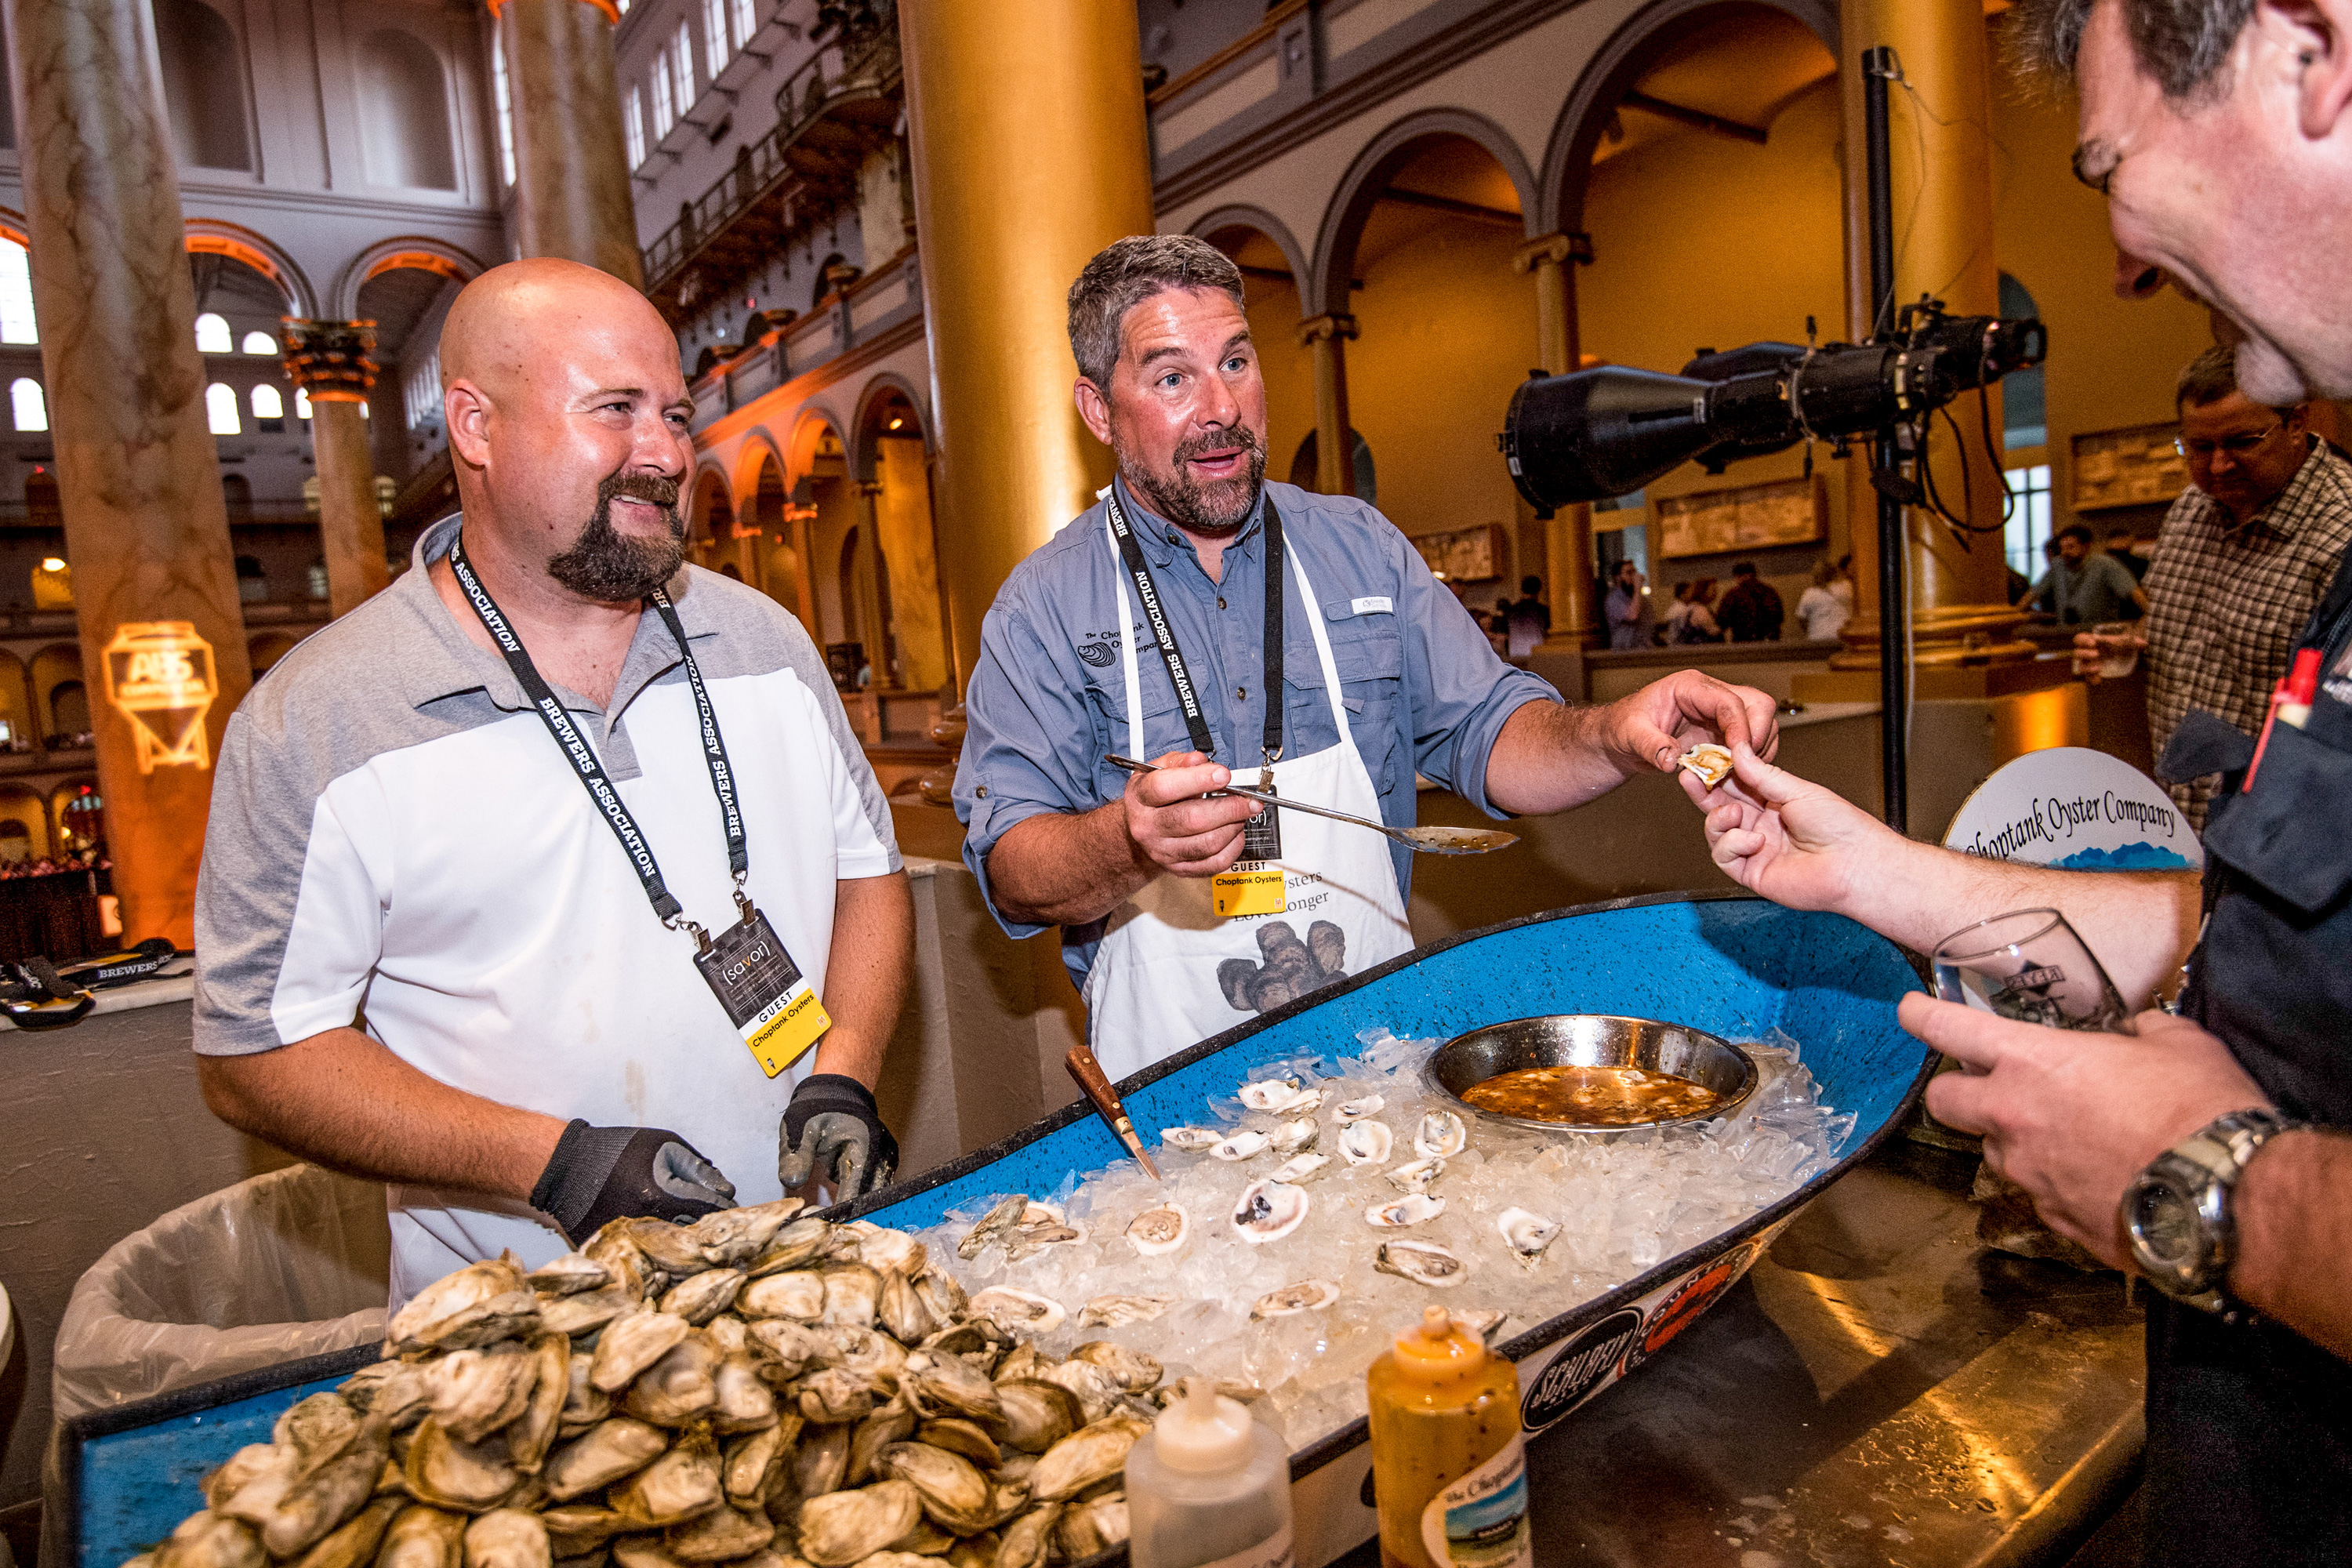 SAVOR - An American Craft Beer & Food Experience (PHOTO © BREWERS ASSOCIATION)